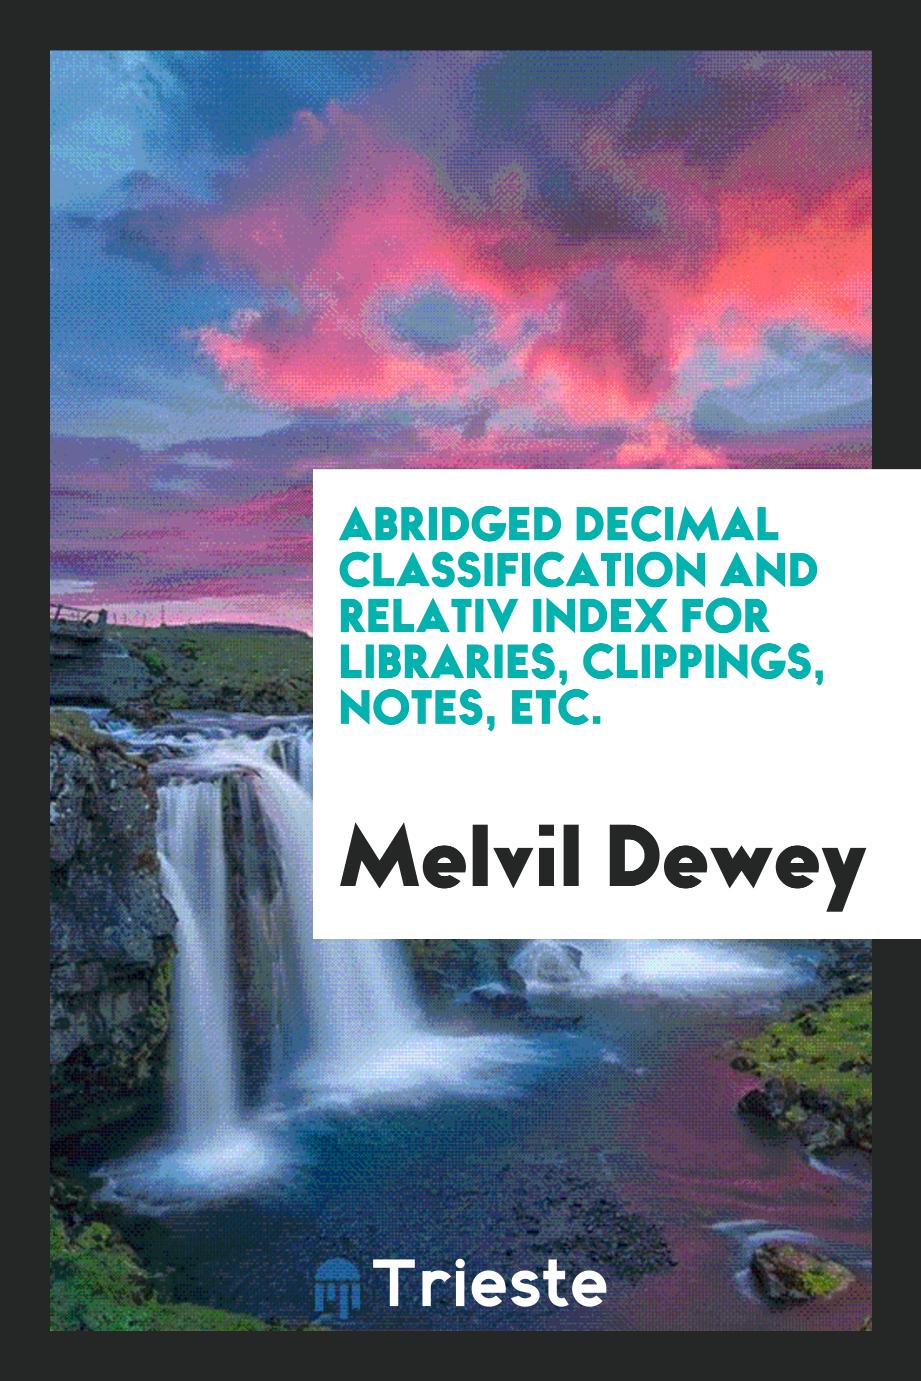 Abridged decimal classification and relativ index for libraries, clippings, notes, etc.